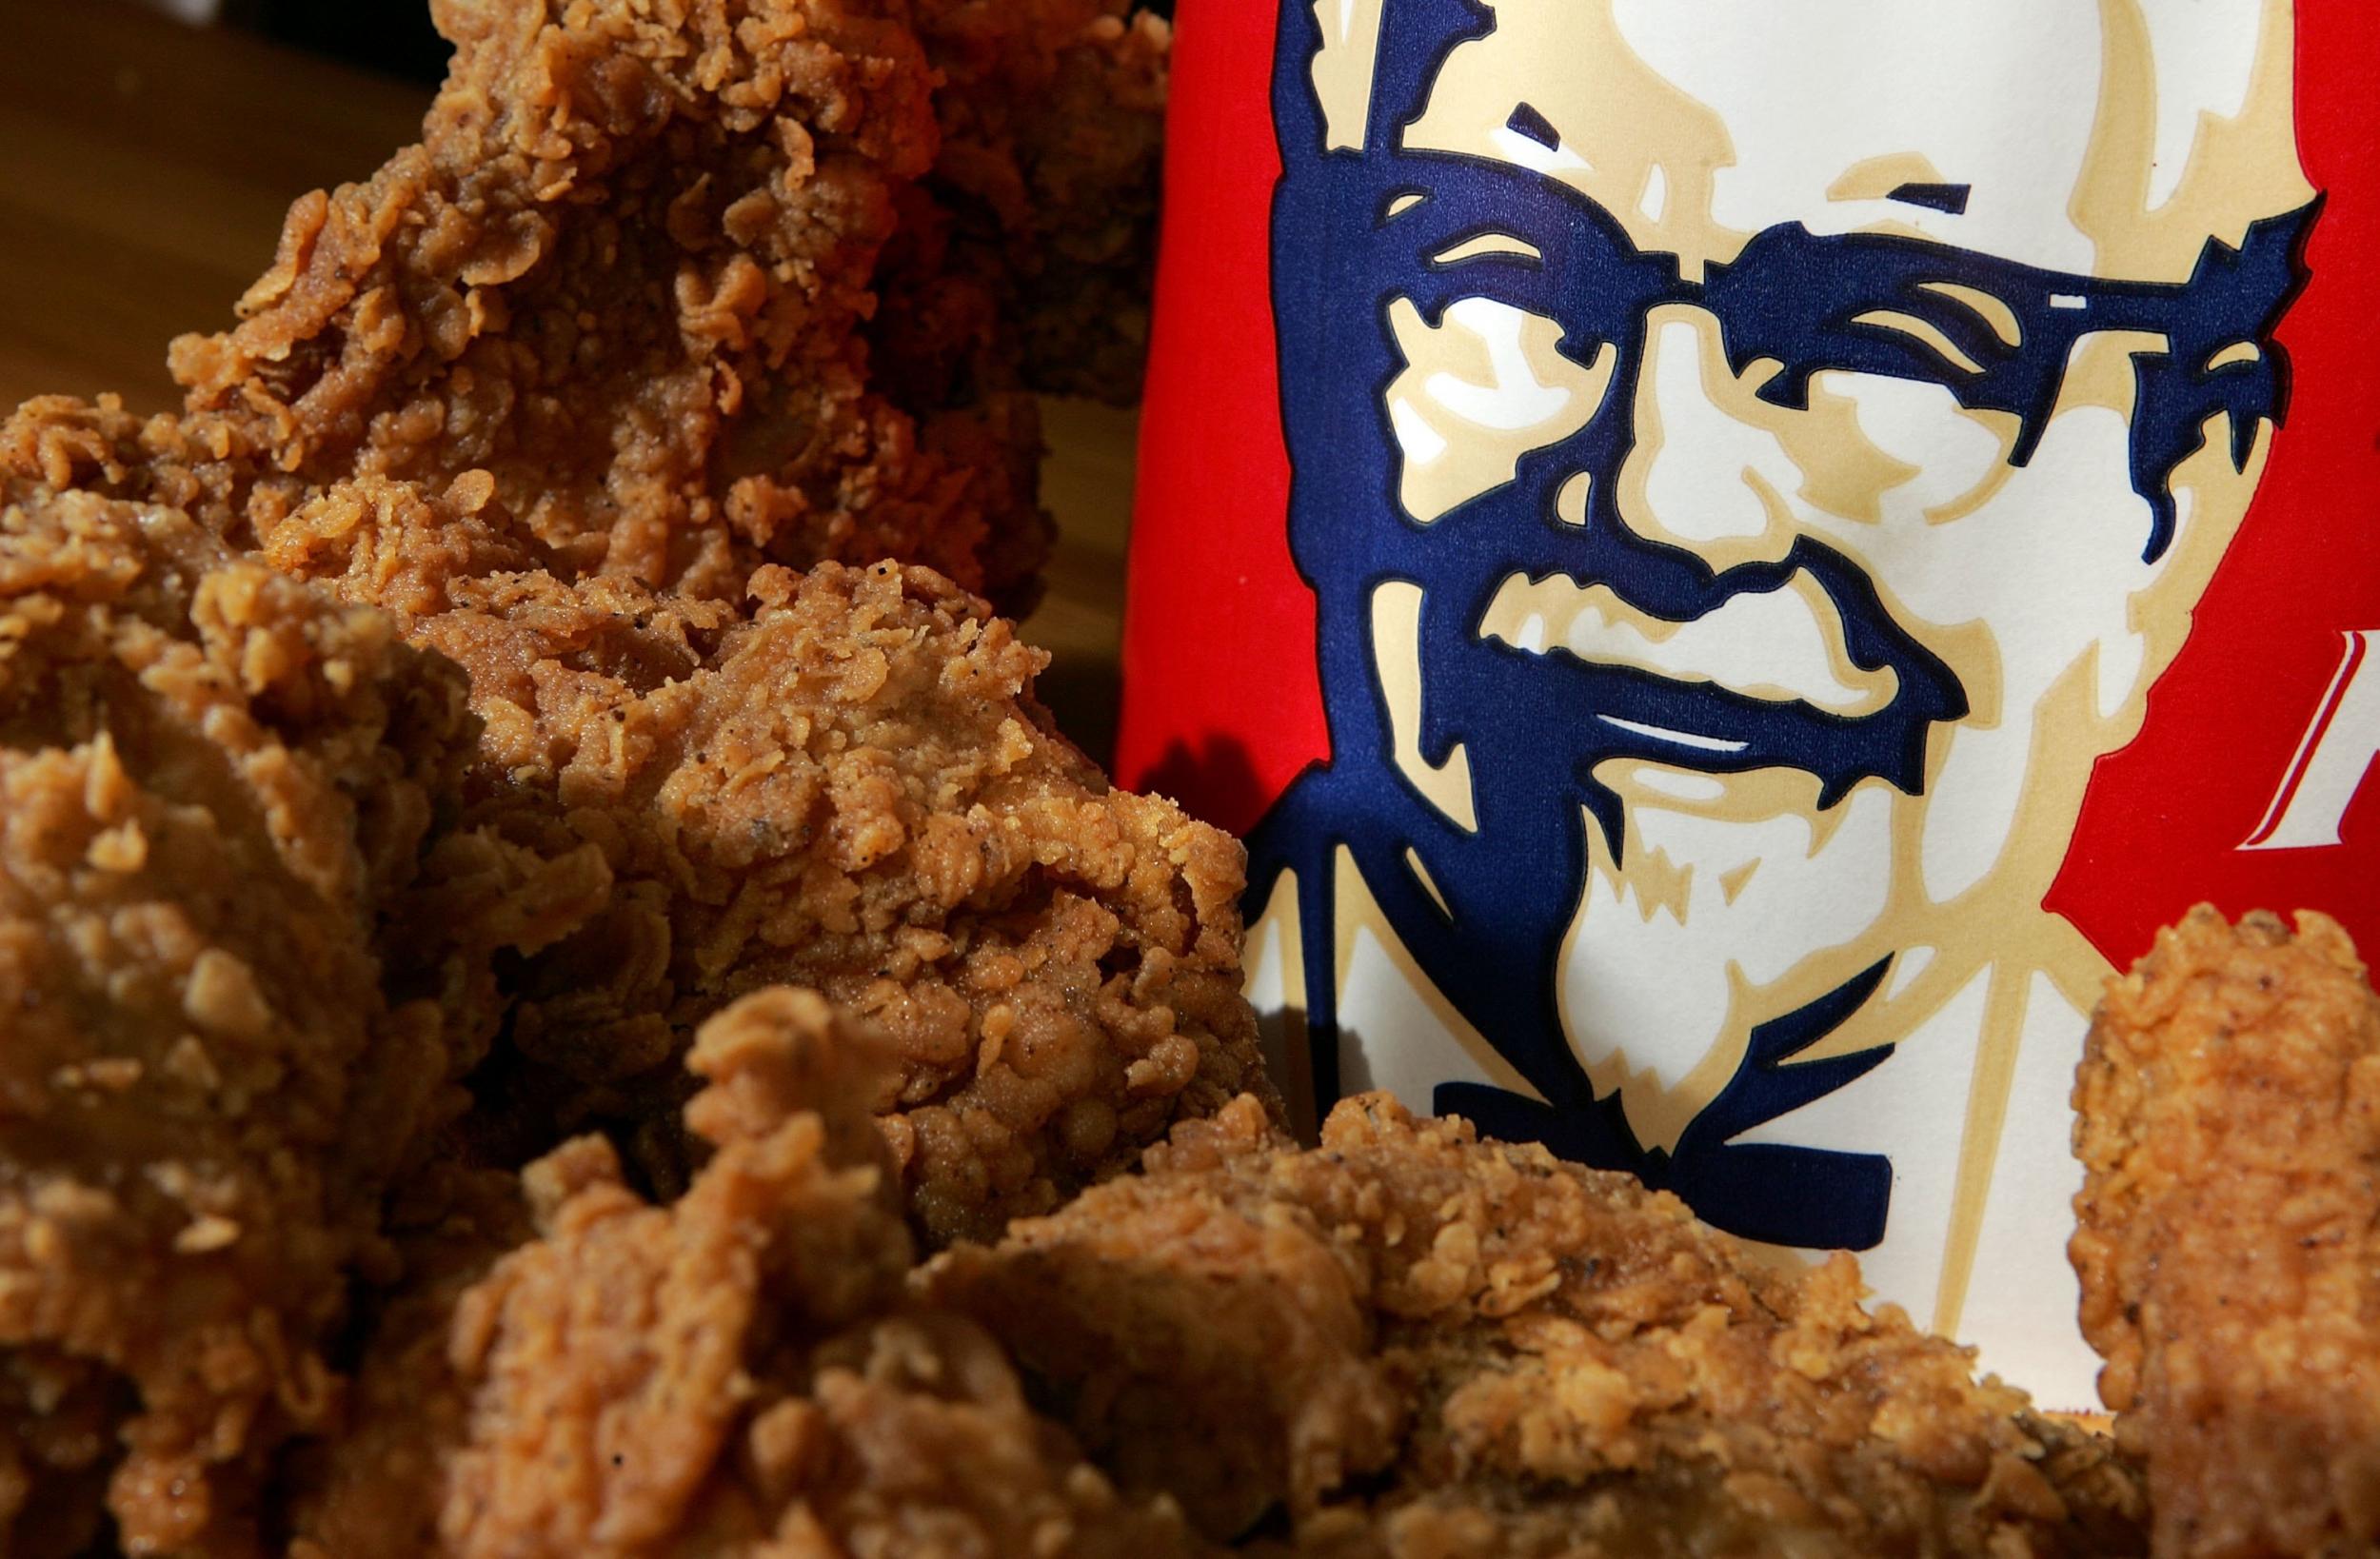 KFC says it is because of delivery 'hiccups'